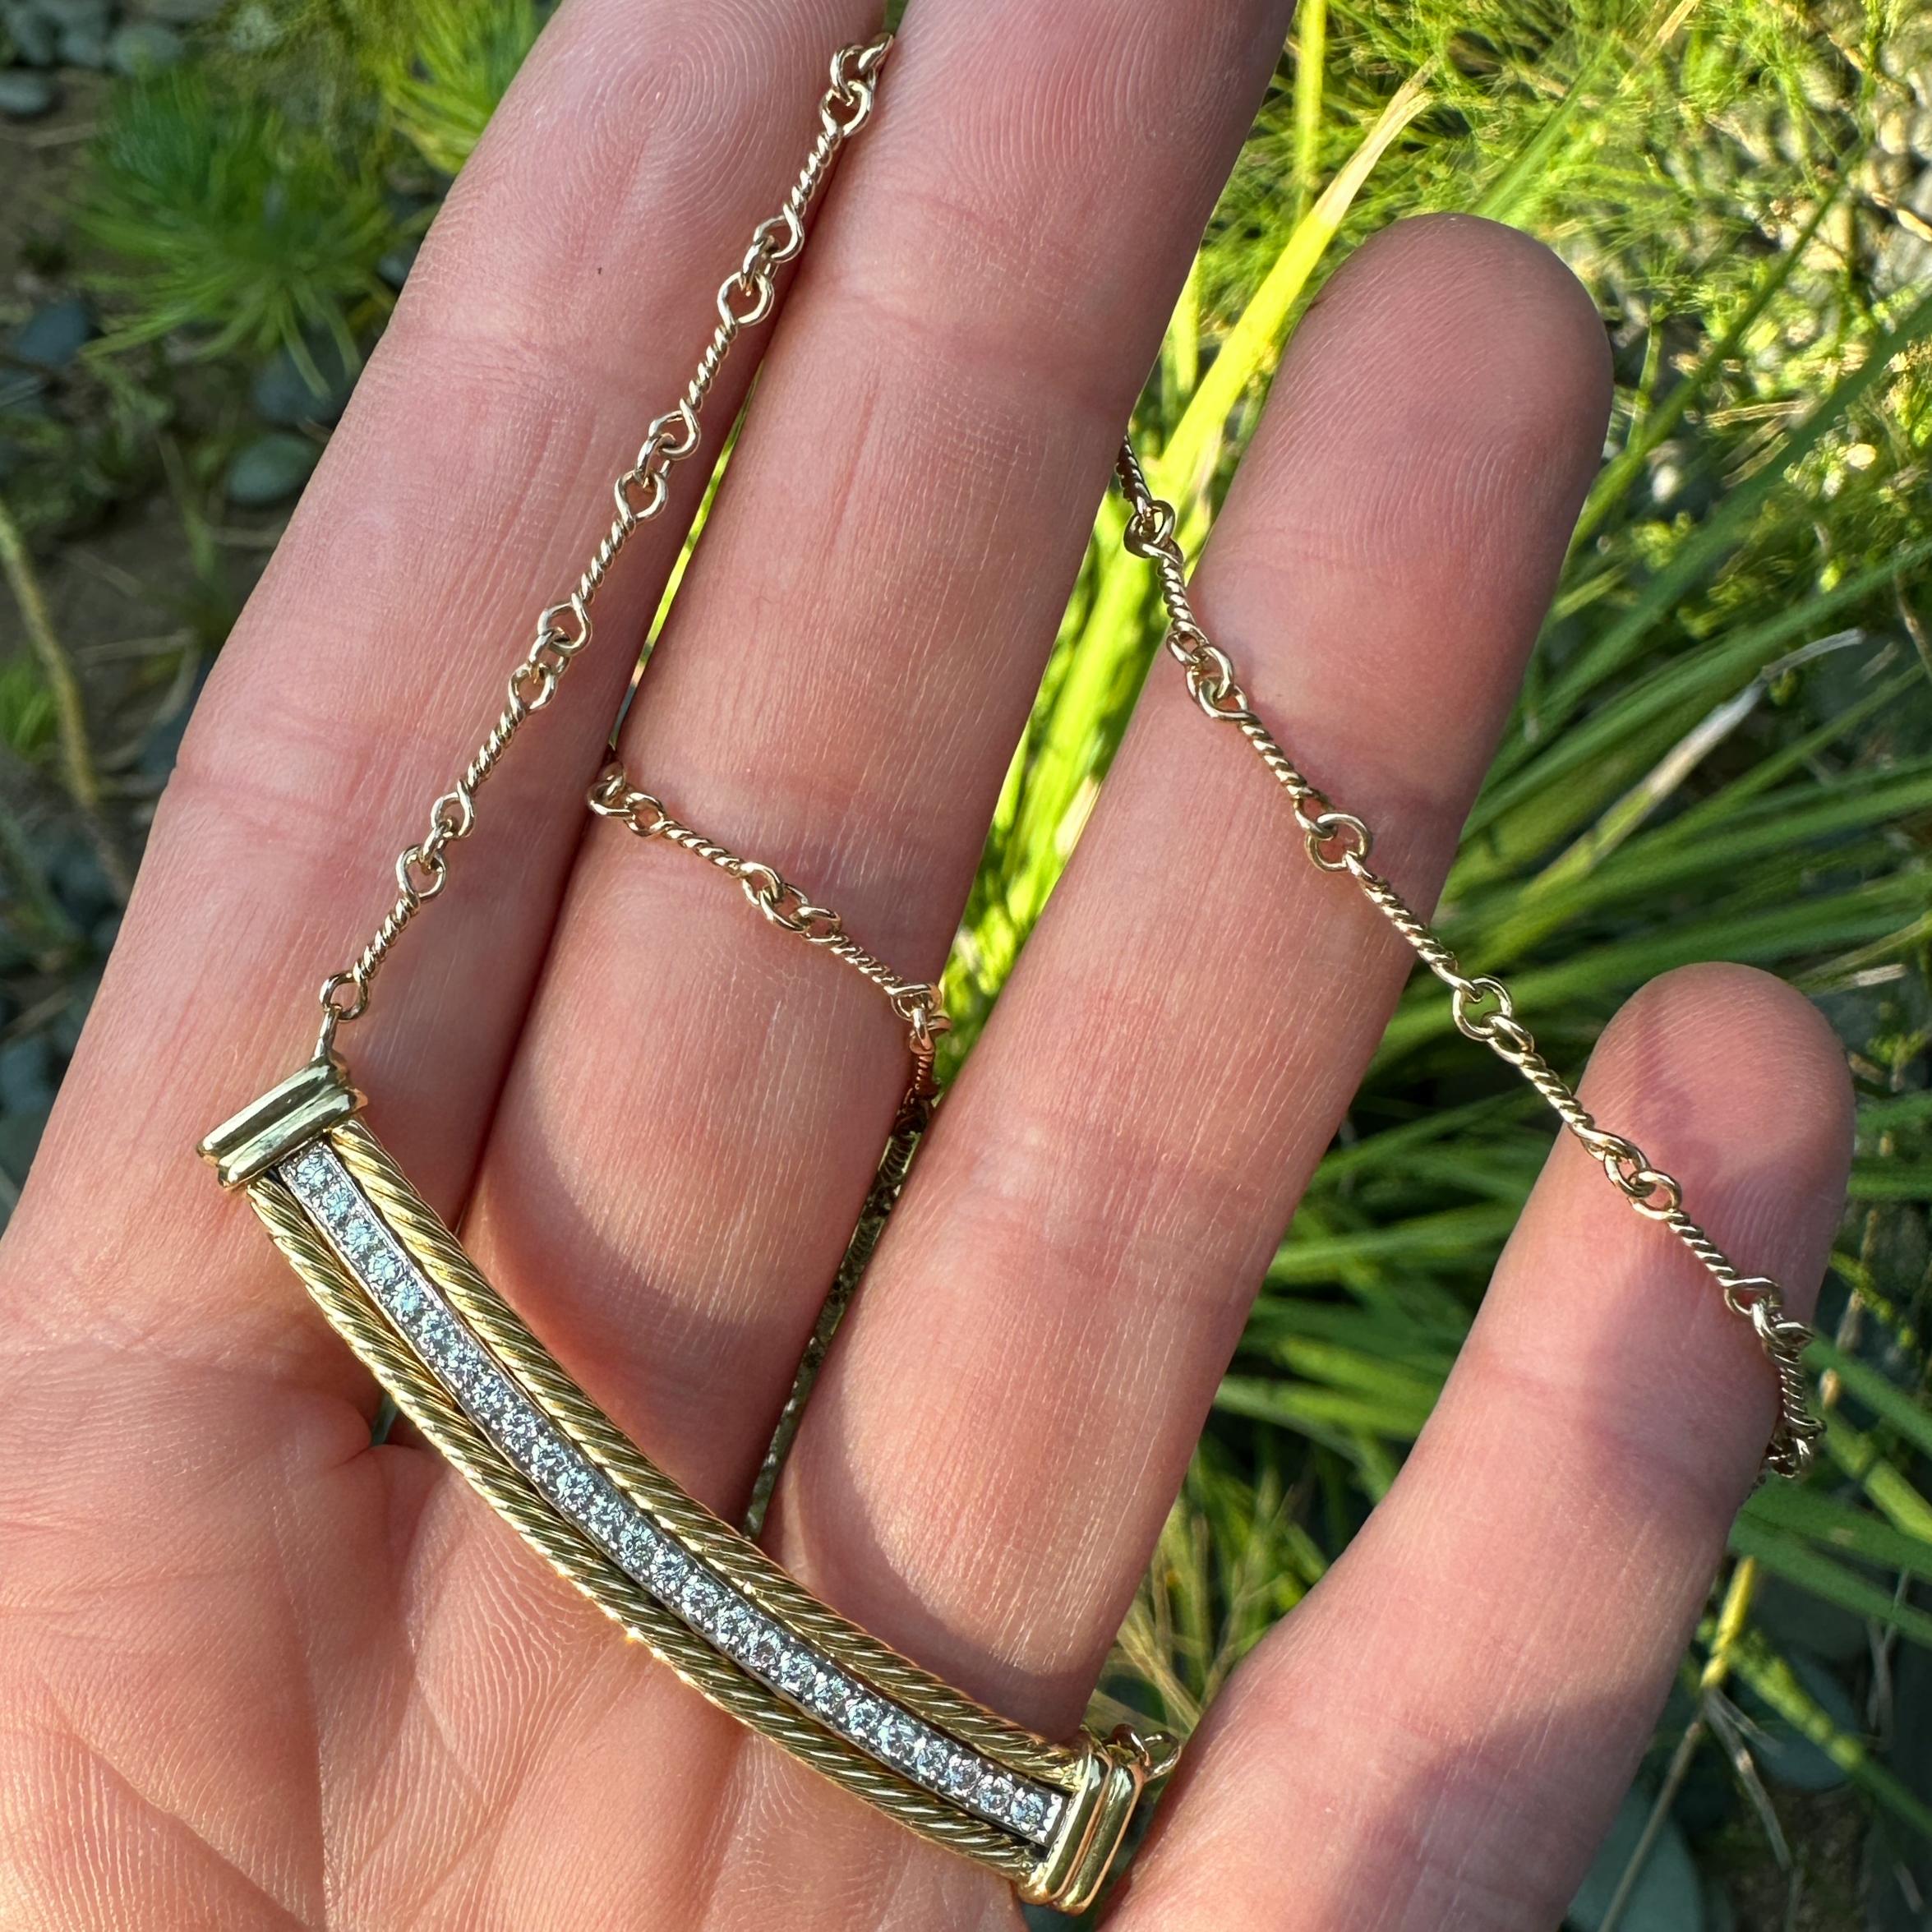 Contemporary 0.25 Carat Diamond Bar Necklace in 18K Gold on Fancy 14K Gold Bar Chain